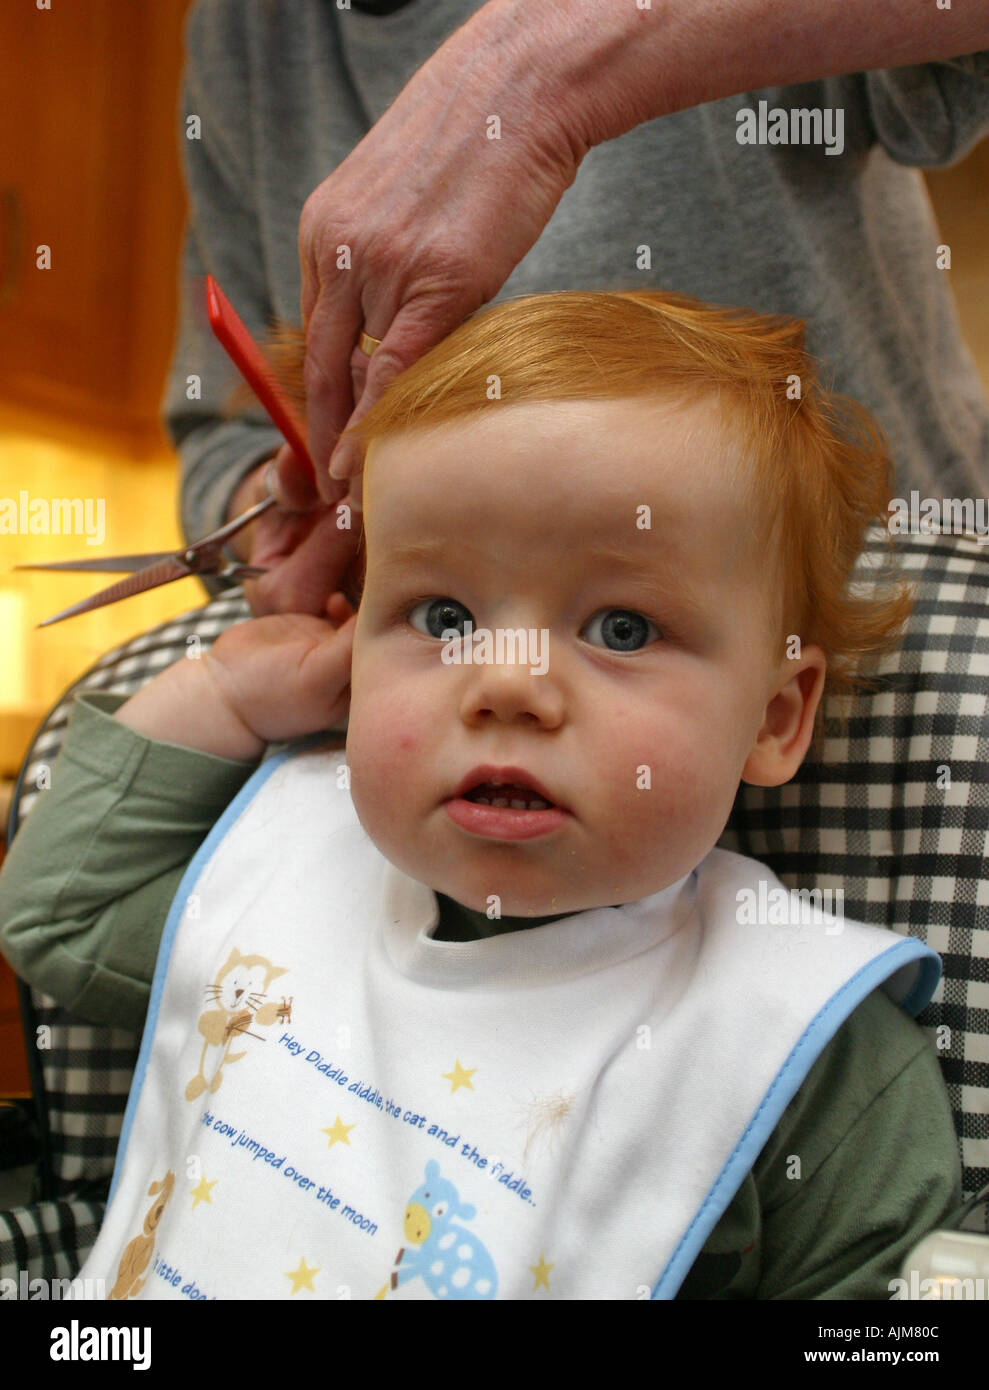 A baby having his first hair cut aged 1 one year old Baby is fighting  against the hairdresser Stock Photo - Alamy